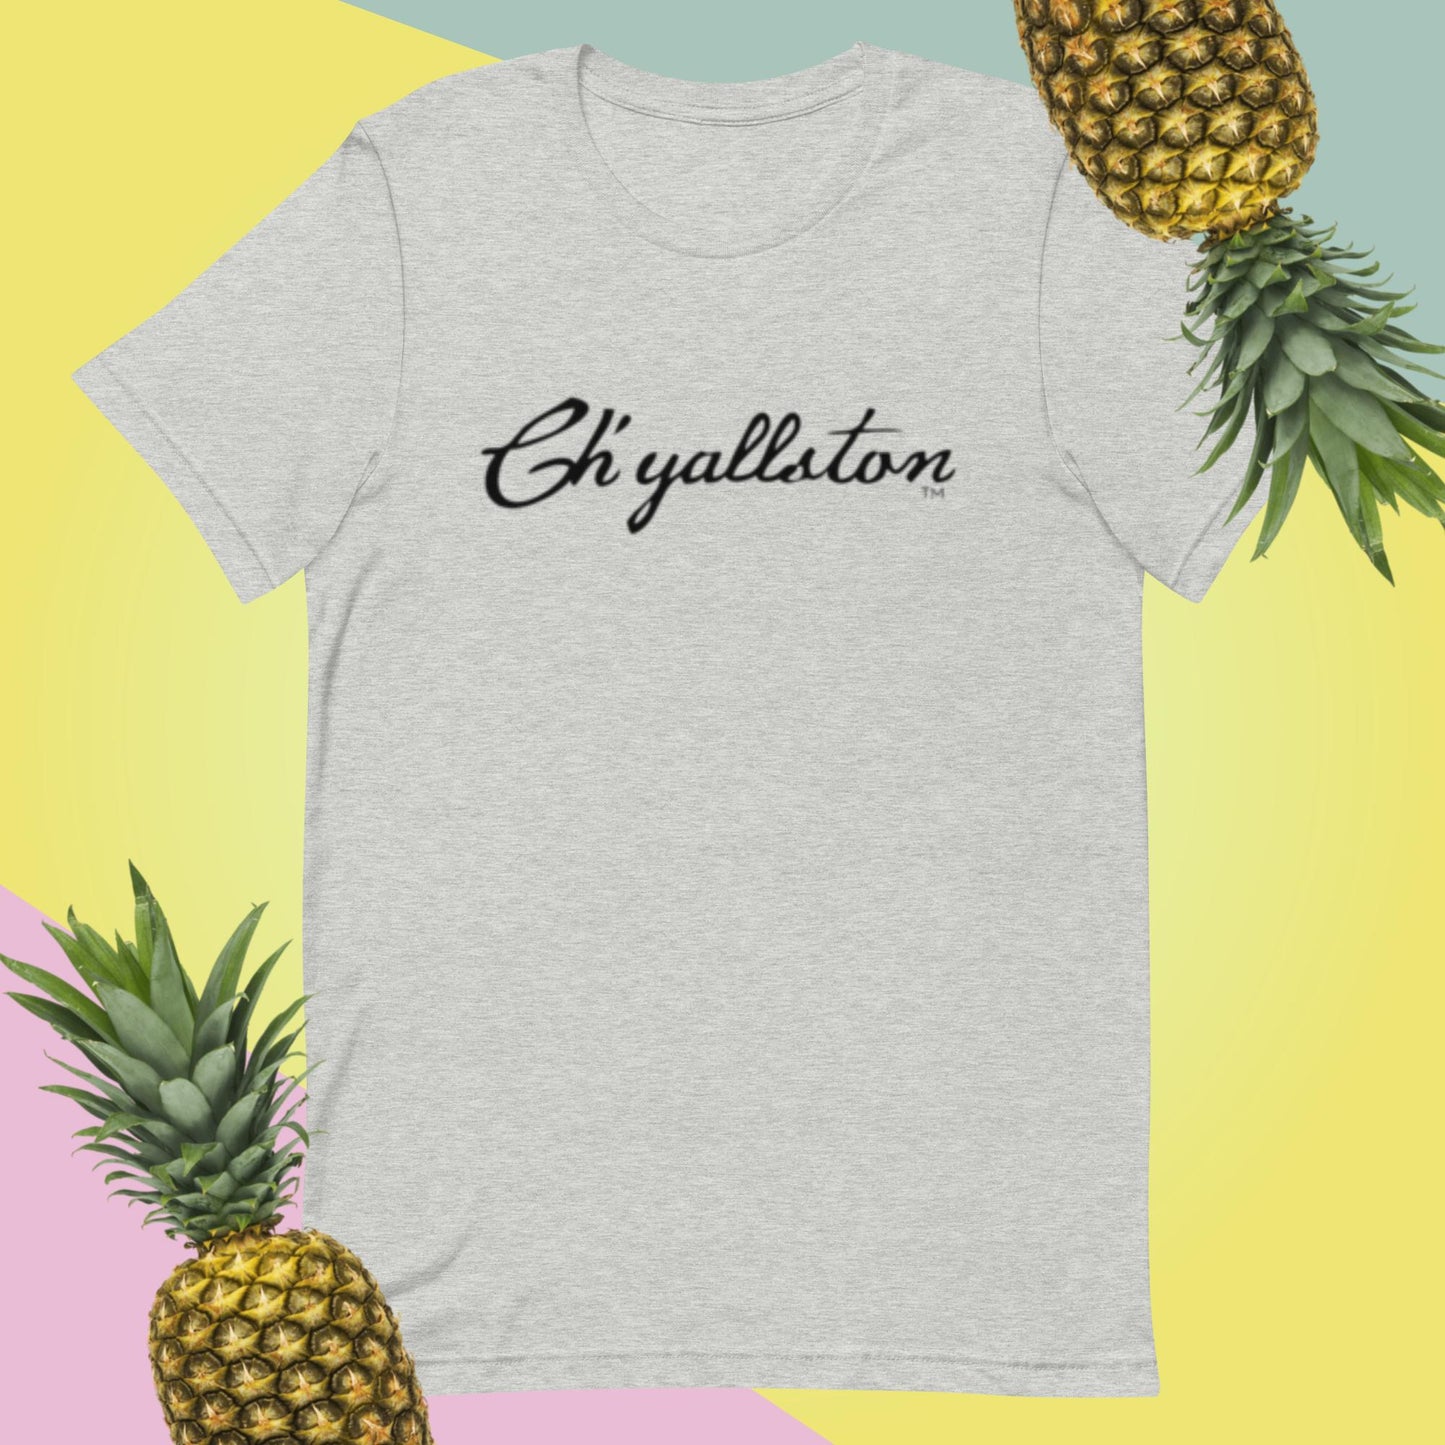 Ch'yallston Unisex T-shirt with Black Lettering - Pluff Mud Mercantile